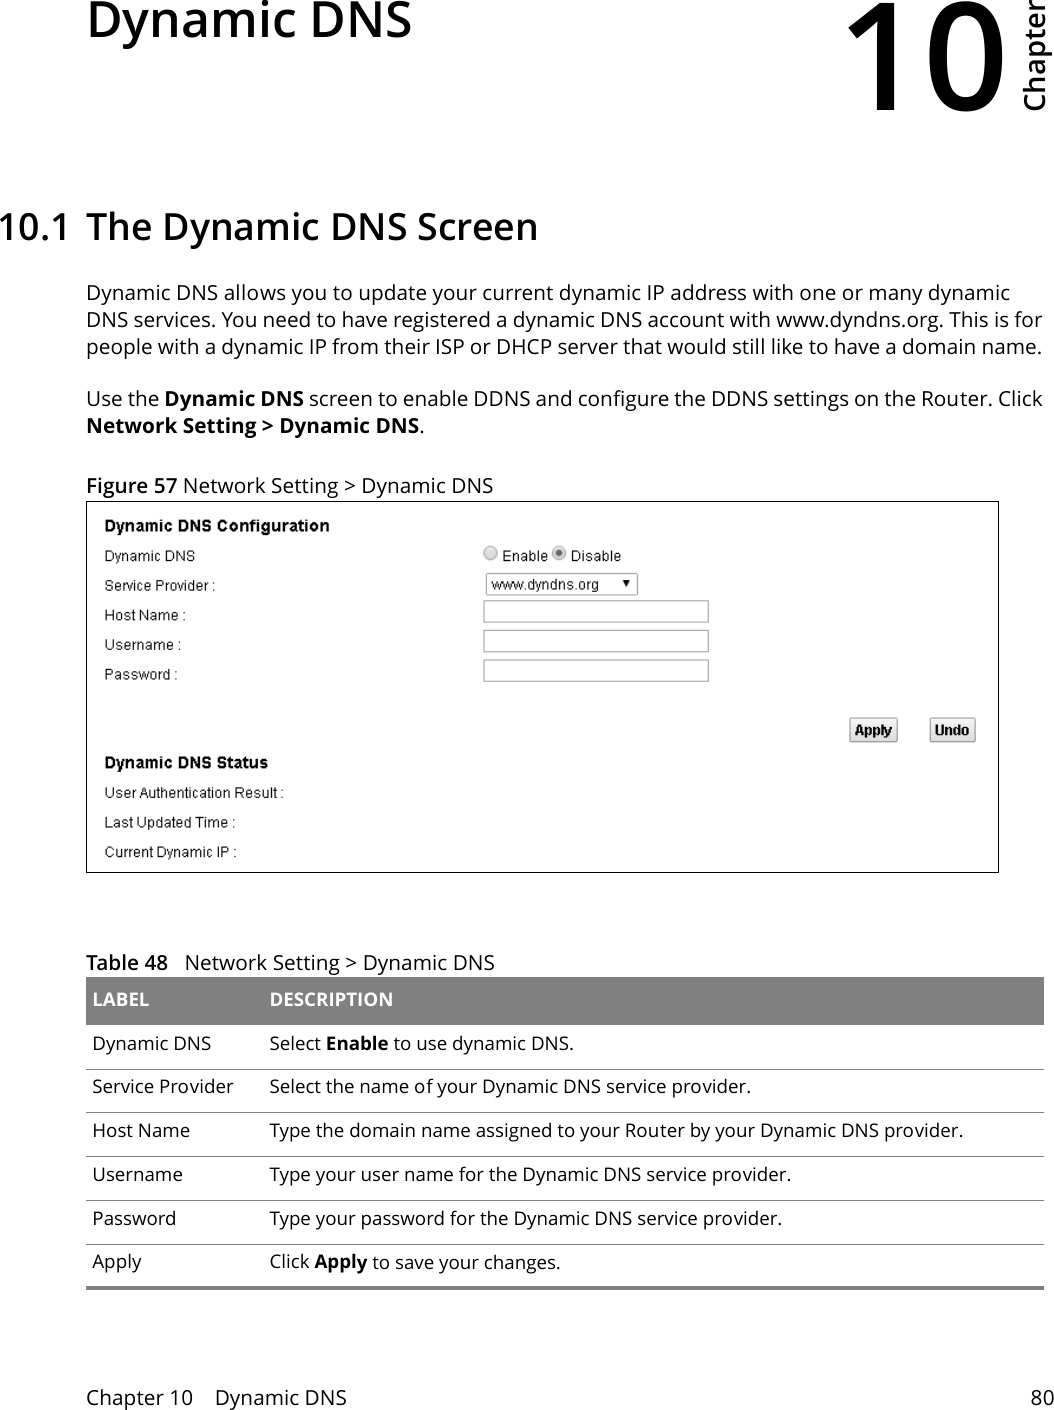 10Chapter Chapter 10    Dynamic DNS 80CHAPTER 10 Chapter 10 Dynamic DNS10.1 The Dynamic DNS ScreenDynamic DNS allows you to update your current dynamic IP address with one or many dynamic DNS services. You need to have registered a dynamic DNS account with www.dyndns.org. This is for people with a dynamic IP from their ISP or DHCP server that would still like to have a domain name. Use the Dynamic DNS screen to enable DDNS and configure the DDNS settings on the Router. Click Network Setting &gt; Dynamic DNS. Figure 57 Network Setting &gt; Dynamic DNS Table 48   Network Setting &gt; Dynamic DNS LABEL DESCRIPTIONDynamic DNS Select Enable to use dynamic DNS.Service Provider Select the name of your Dynamic DNS service provider.Host Name Type the domain name assigned to your Router by your Dynamic DNS provider.Username Type your user name for the Dynamic DNS service provider.Password Type your password for the Dynamic DNS service provider.Apply Click Apply to save your changes.